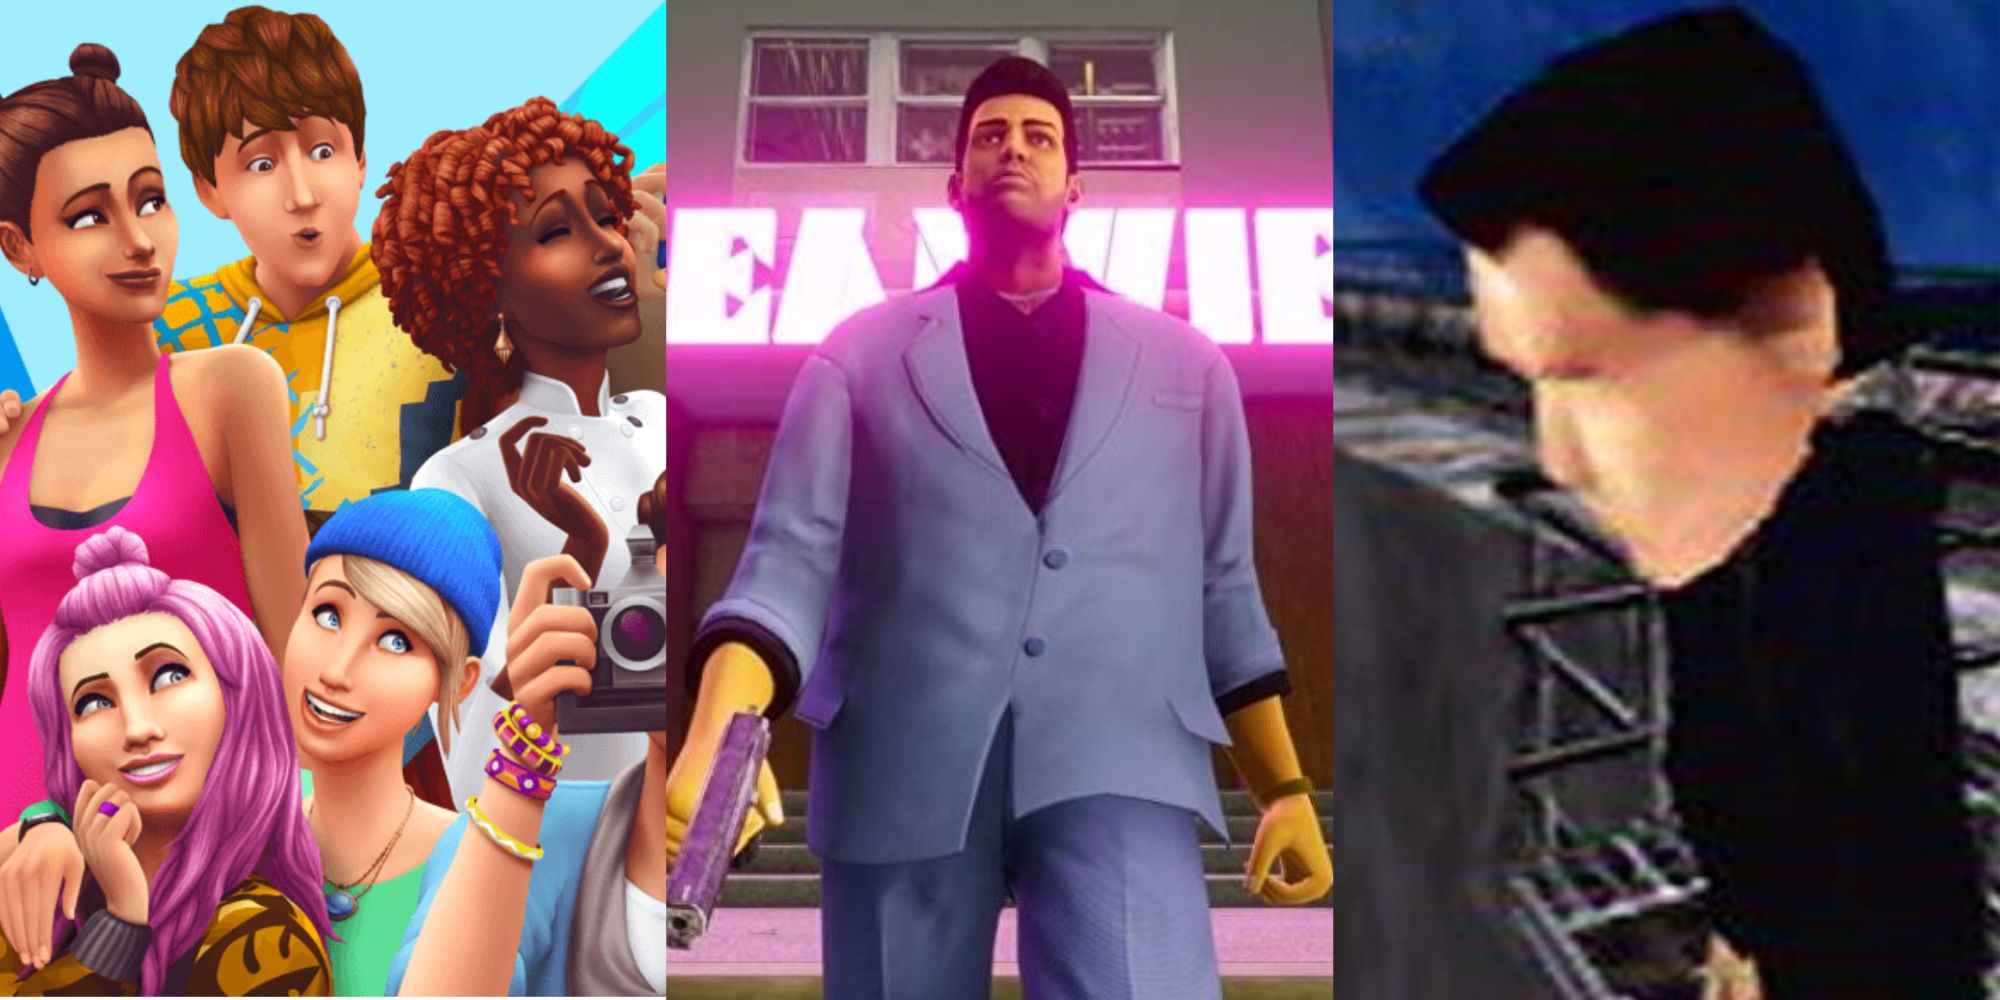 Cheat Code Featured - The Sims, Vice City, GoldenEye 007